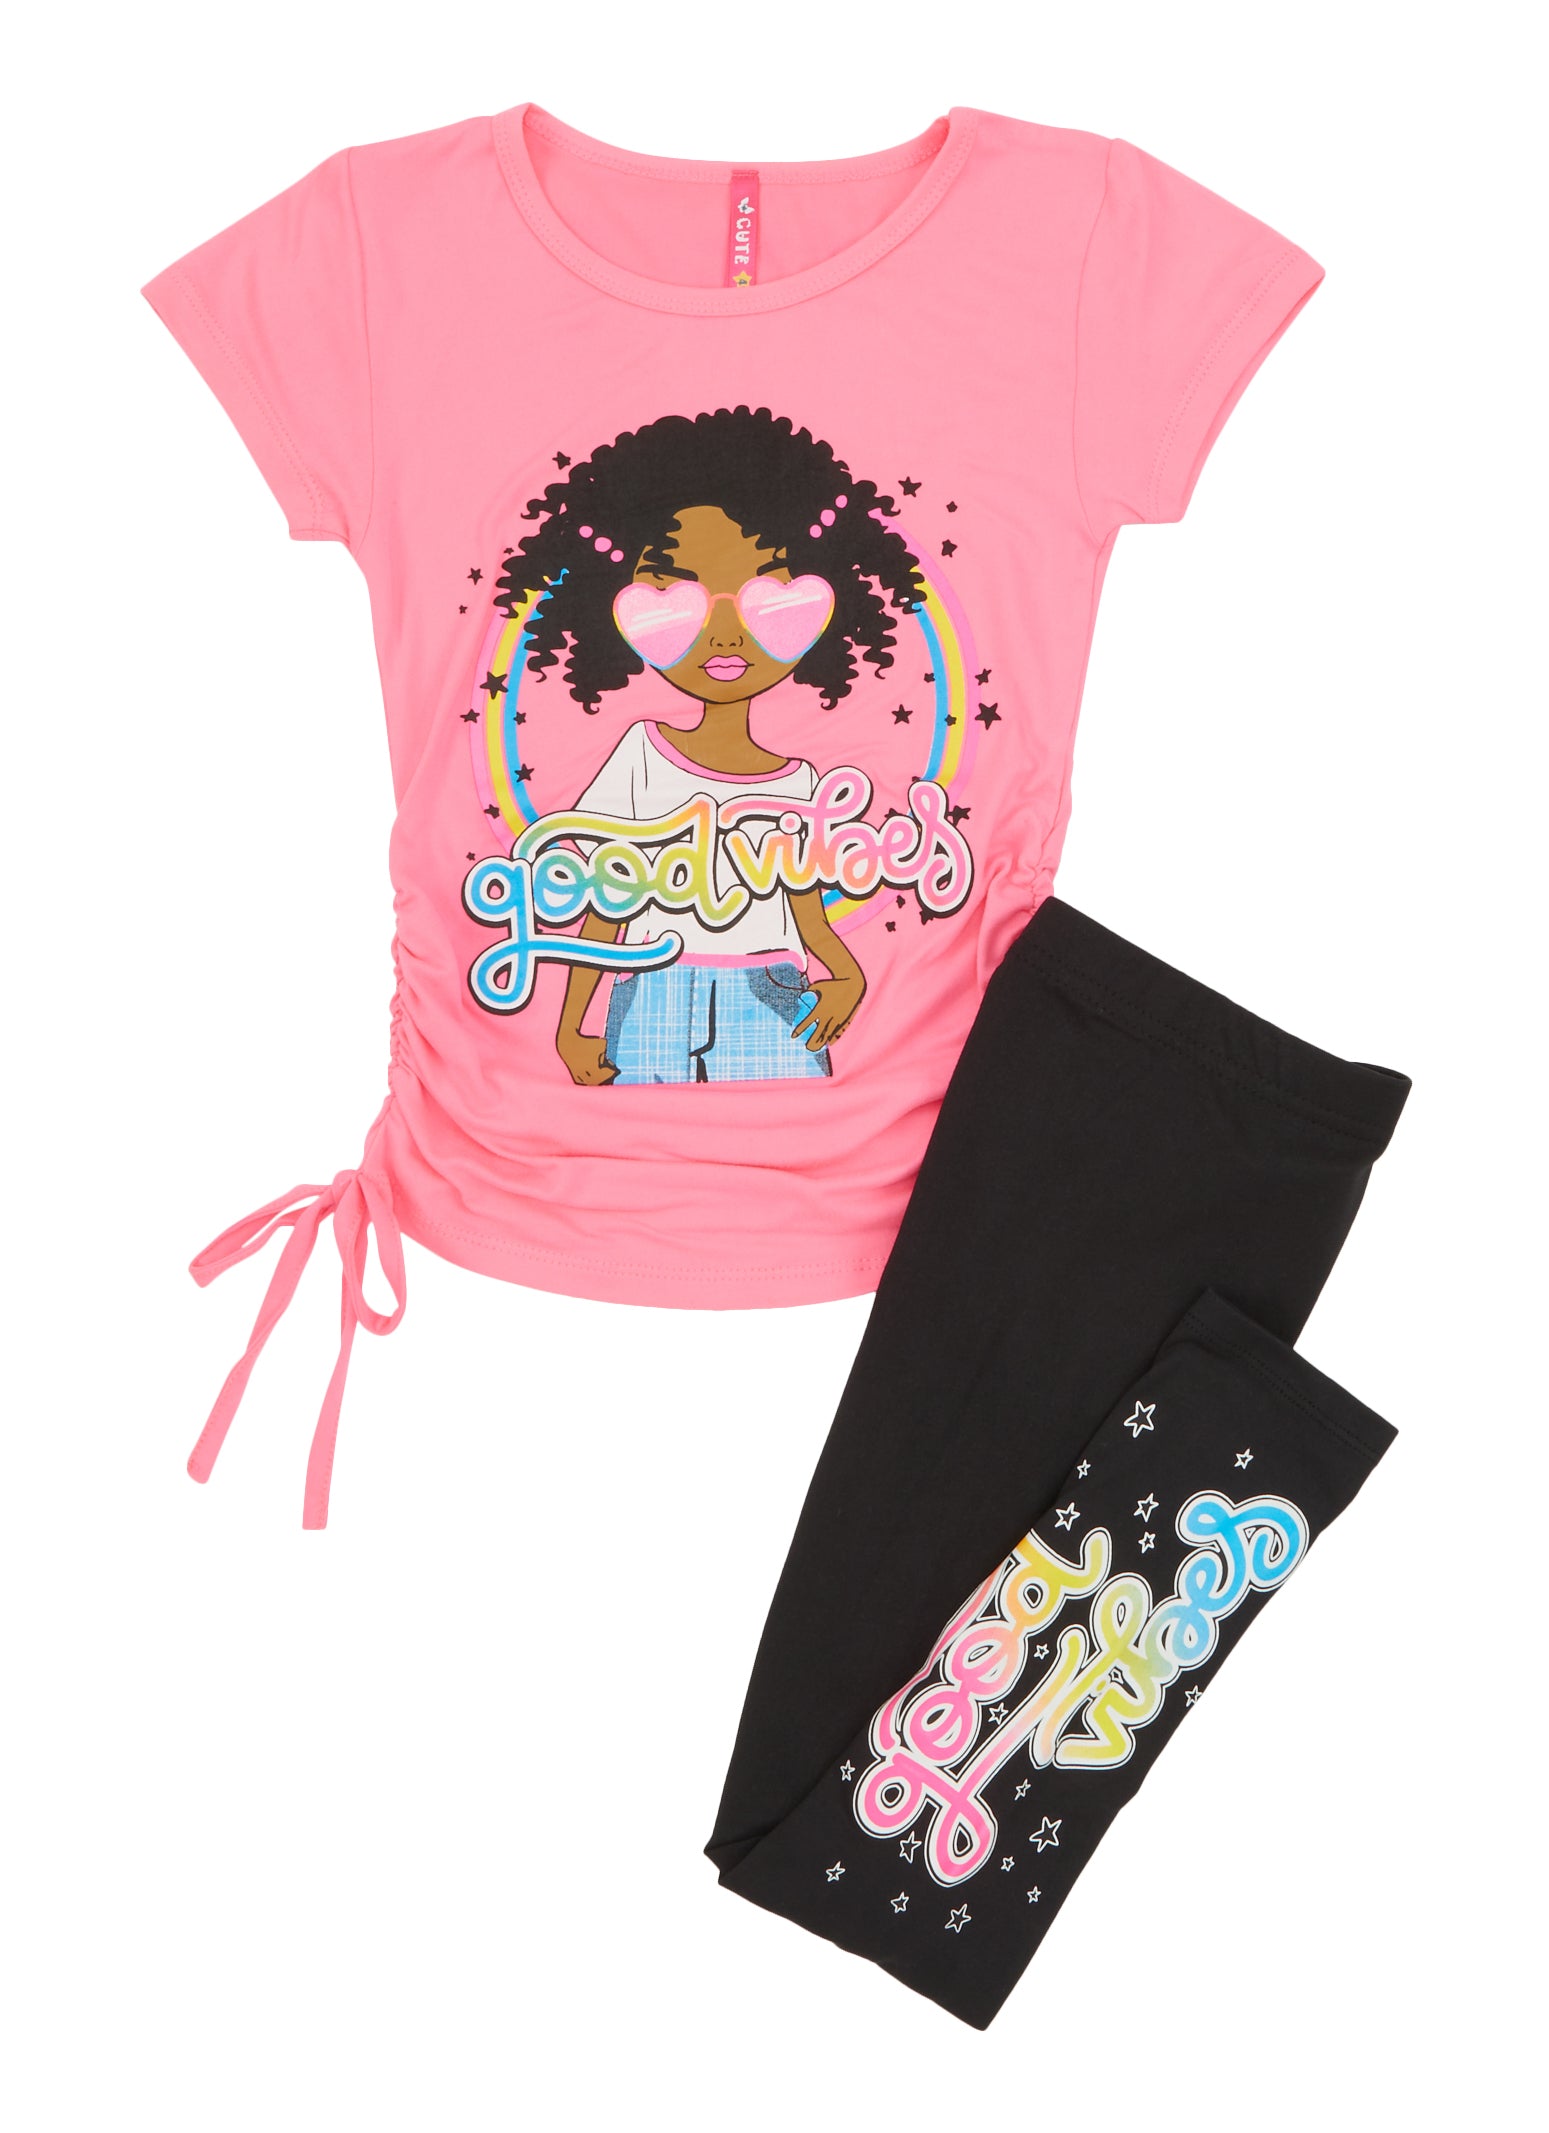 Little Girls Good Vibes Graphic Tee and Leggings, Pink, Size 6X